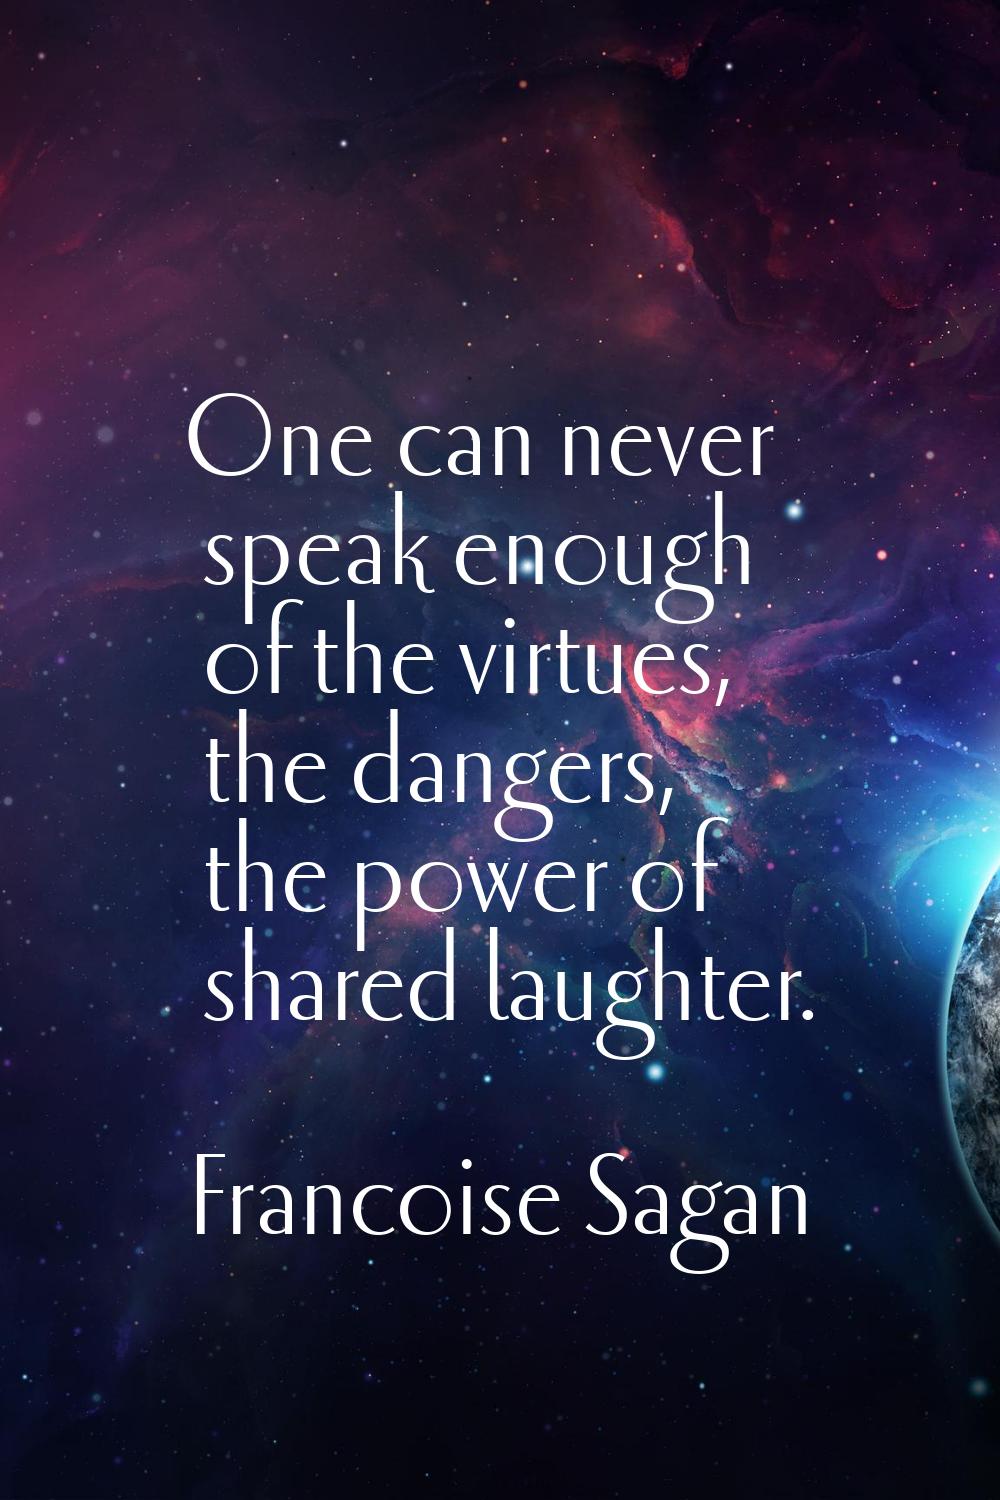 One can never speak enough of the virtues, the dangers, the power of shared laughter.